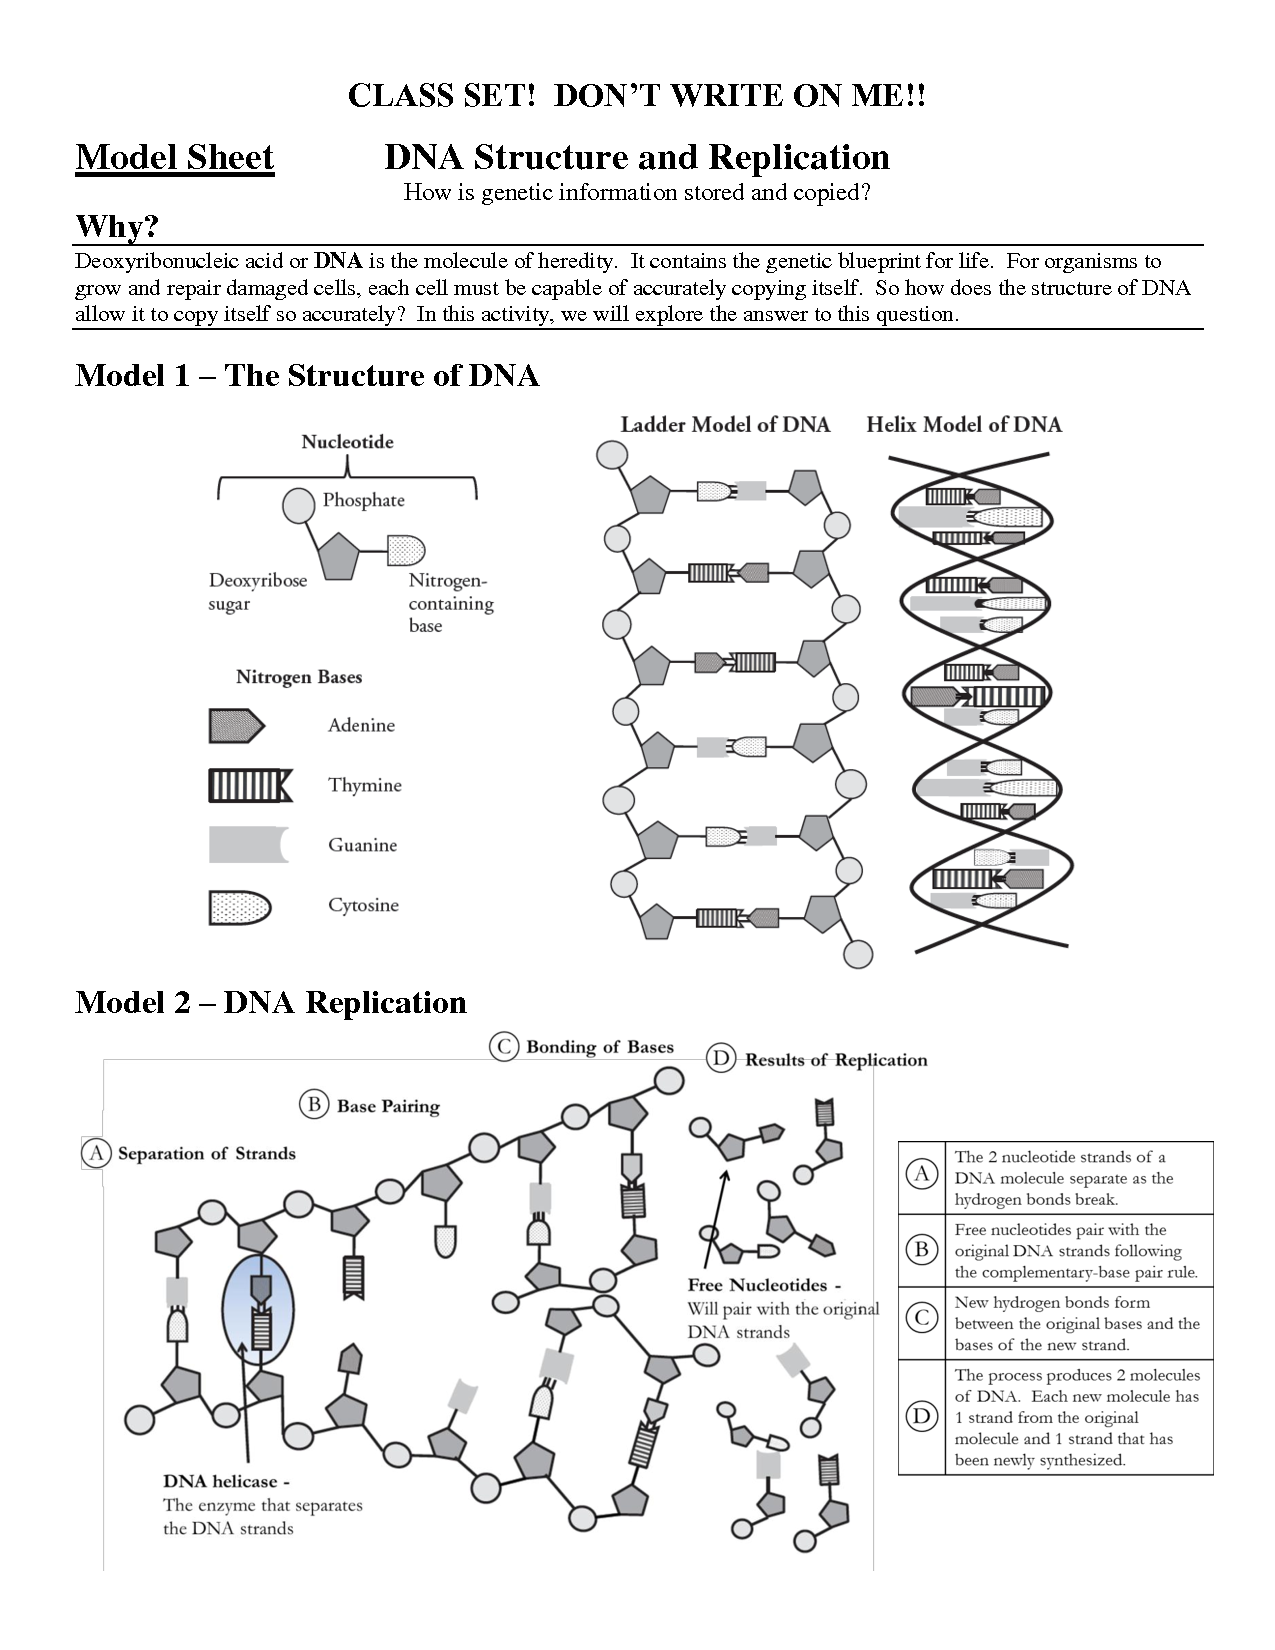 DNA Structure and Replication Answer Key POGIL